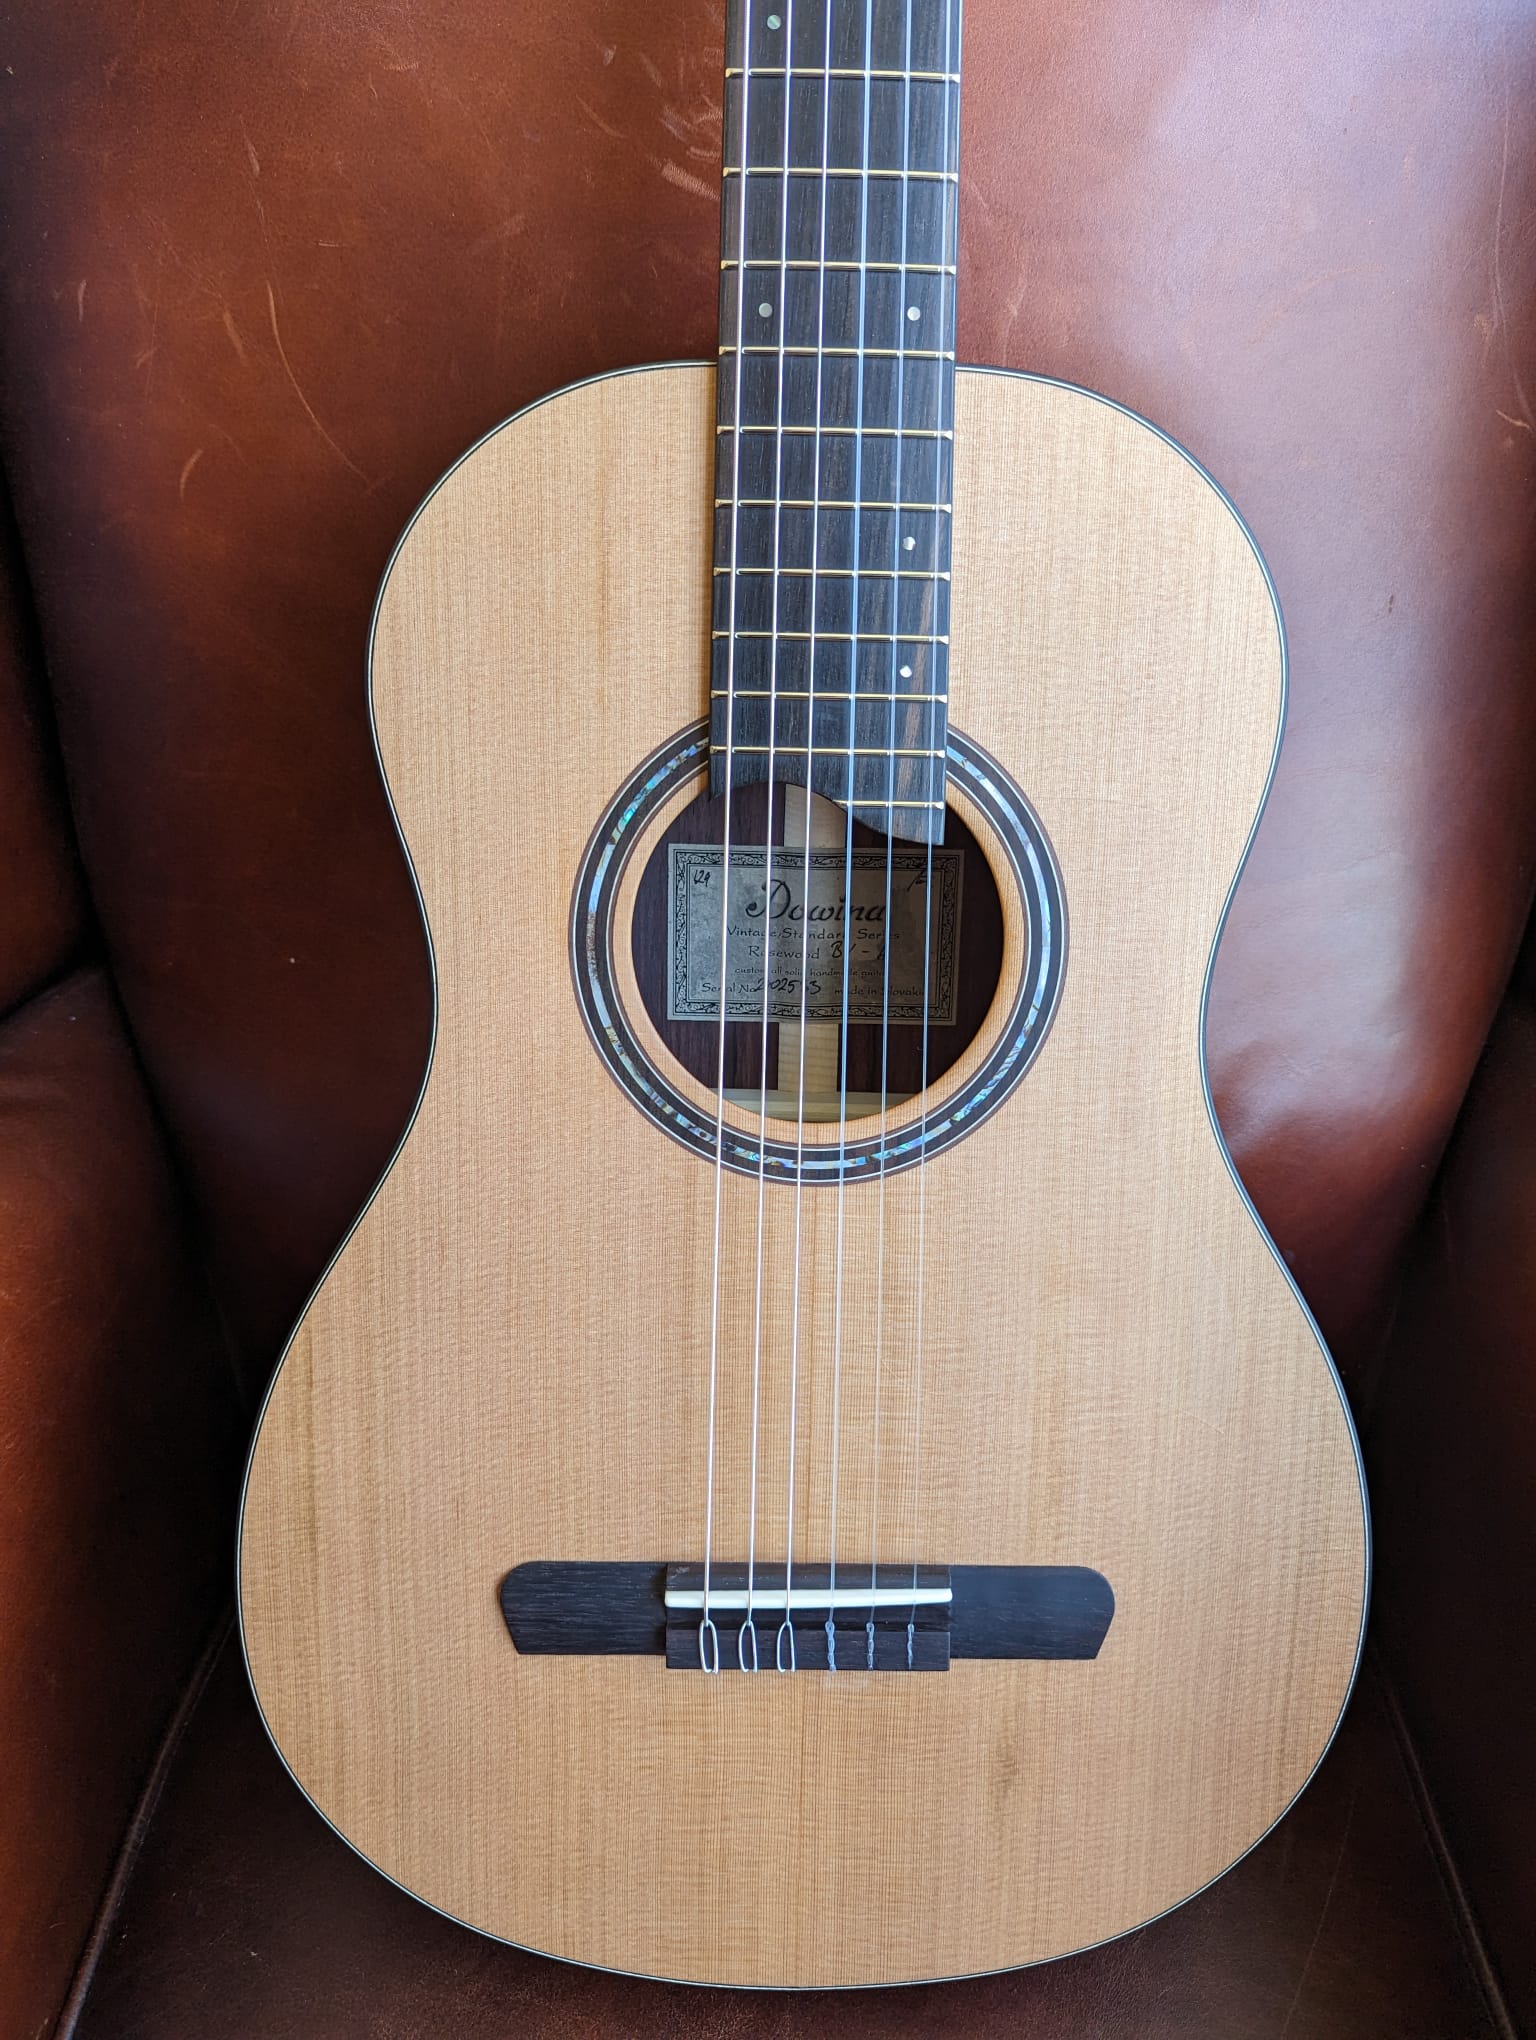 Dowina Rosewood BVH, Acoustic Guitar for sale at Richards Guitars.